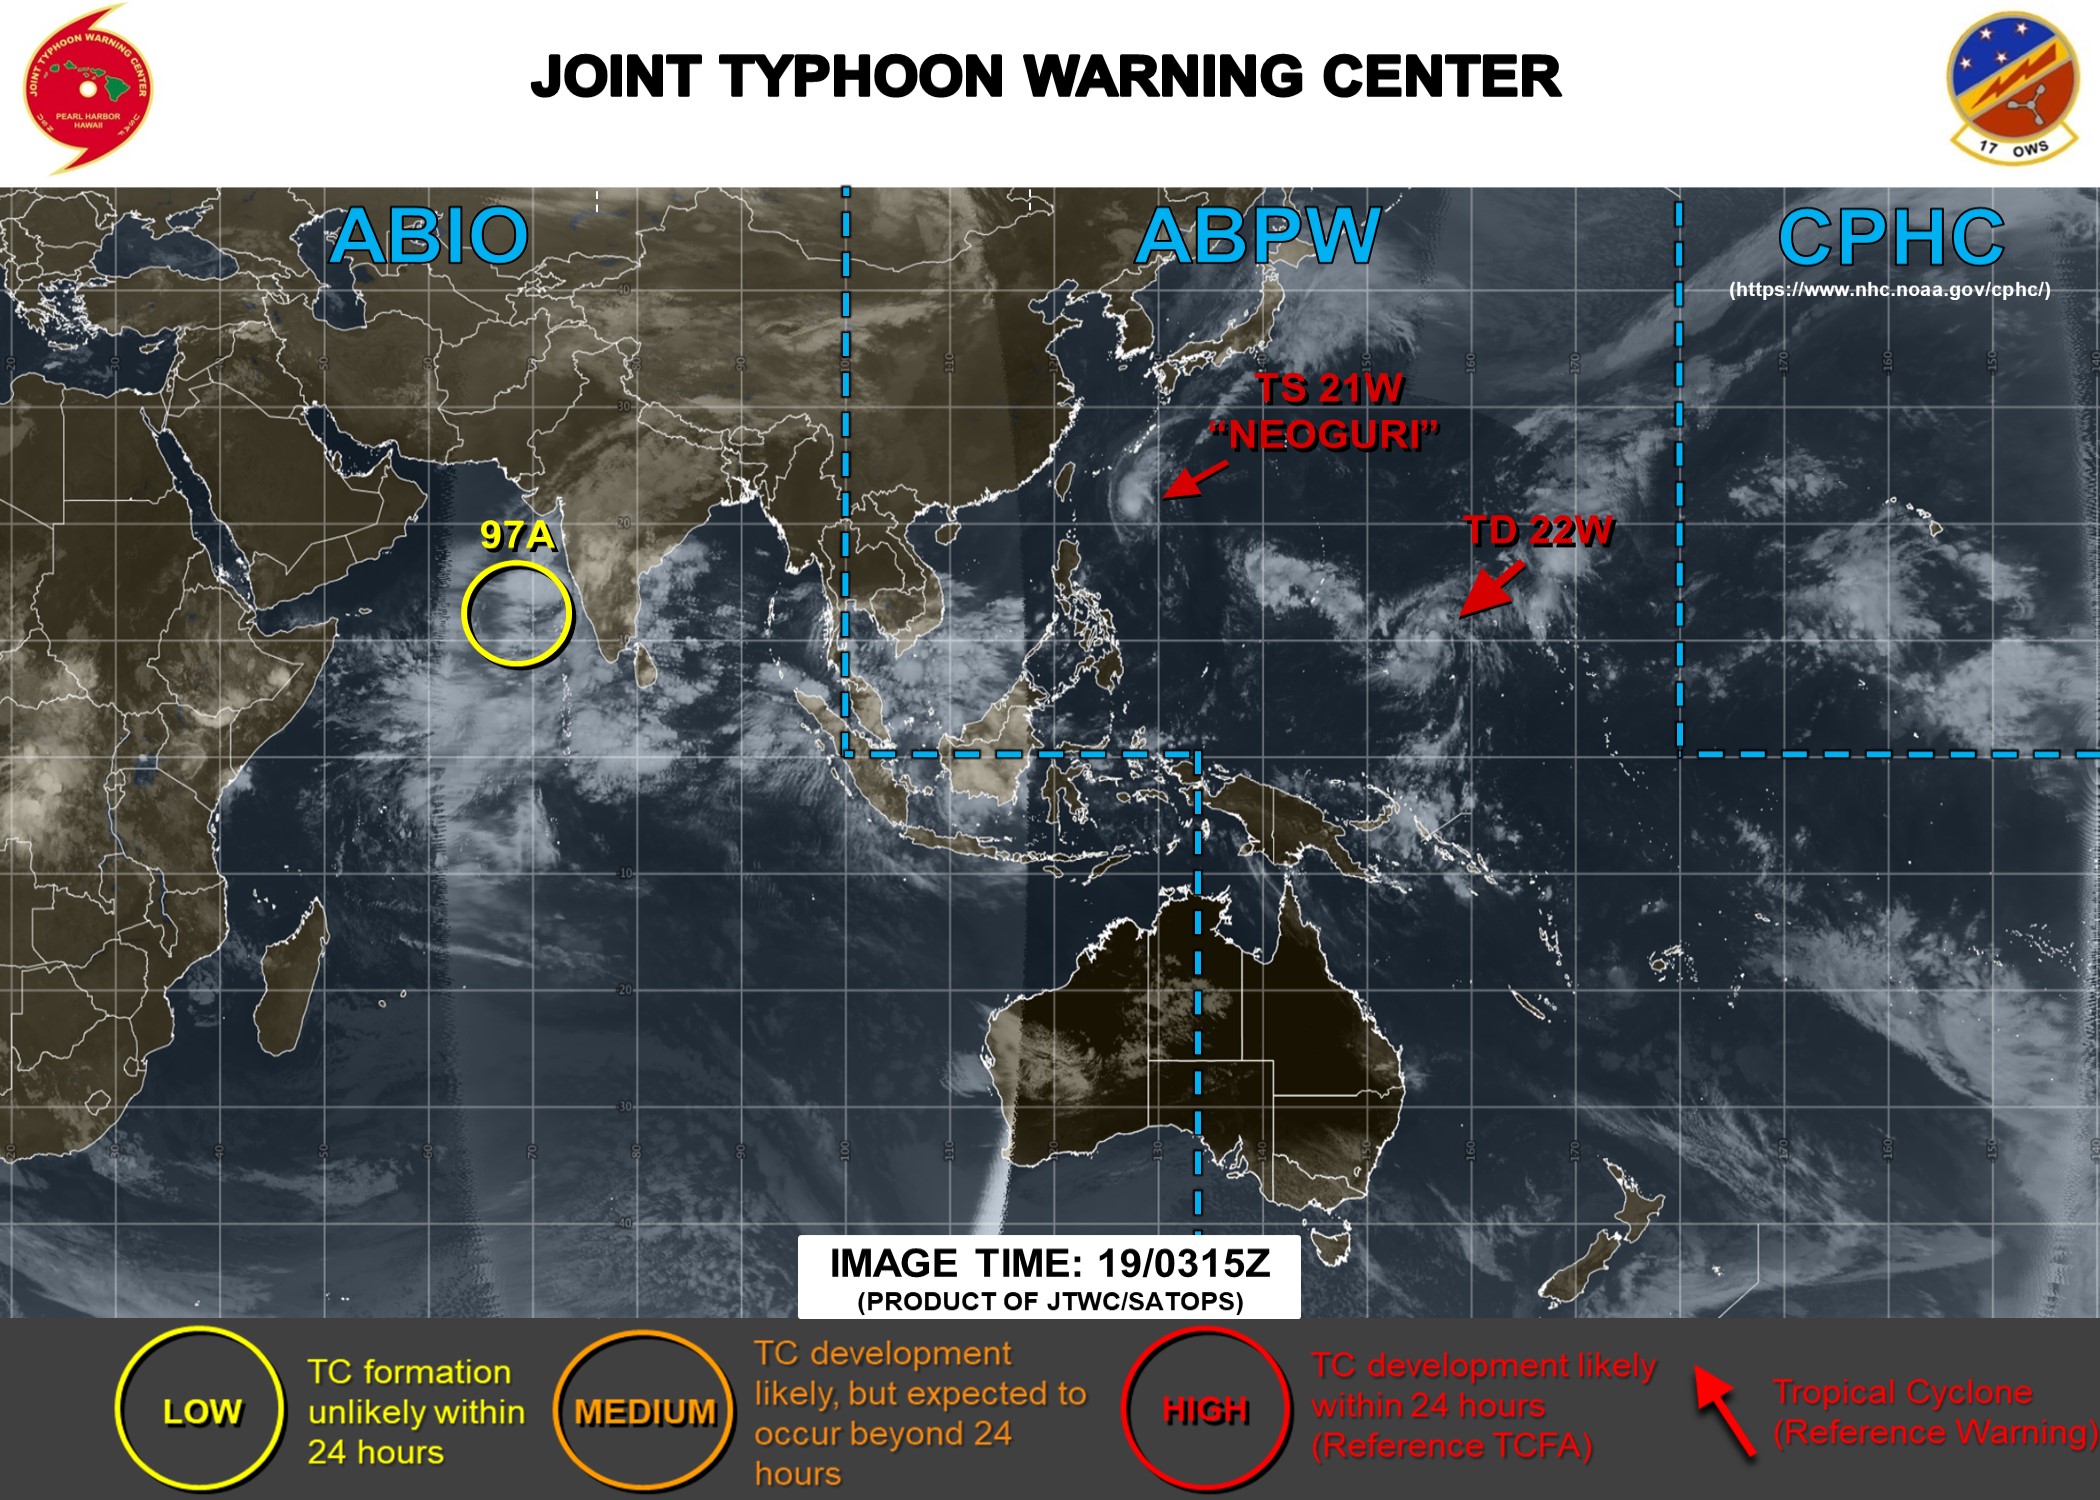 21W and 22W : cyclonic duo being monitored